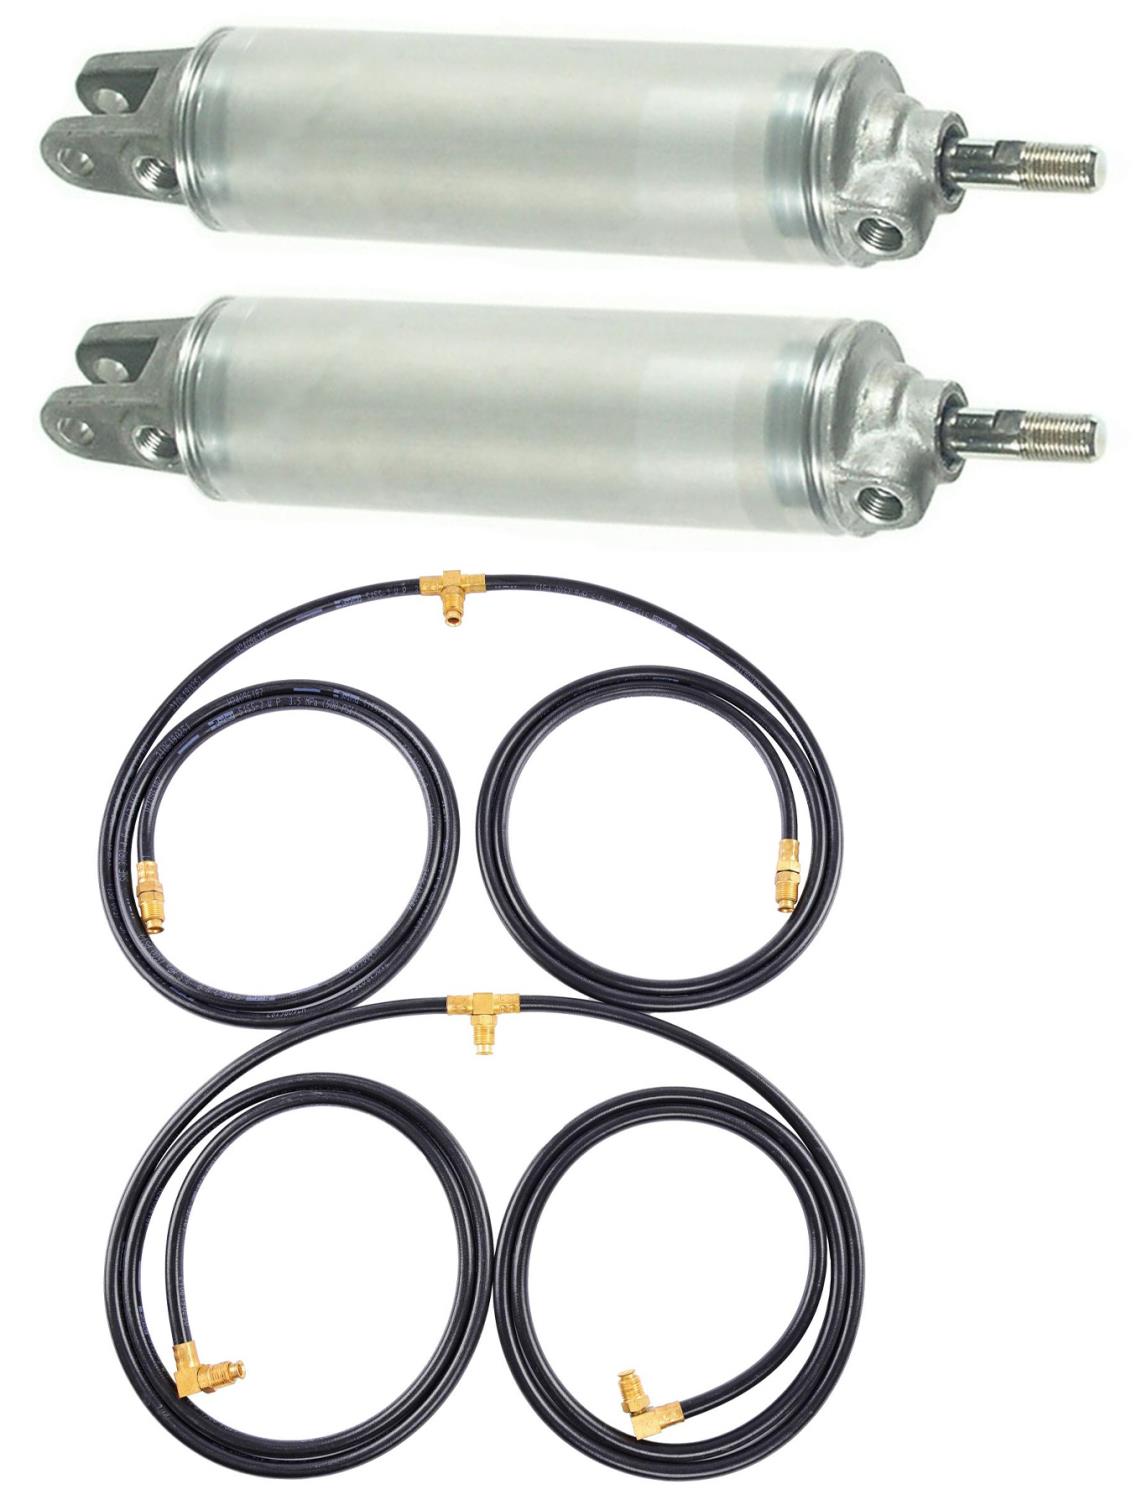 Convertible Top Cylinder & Hose Kit for 1956-1961 Chevrolet Corvette Convertibles [Sold as a Kit]